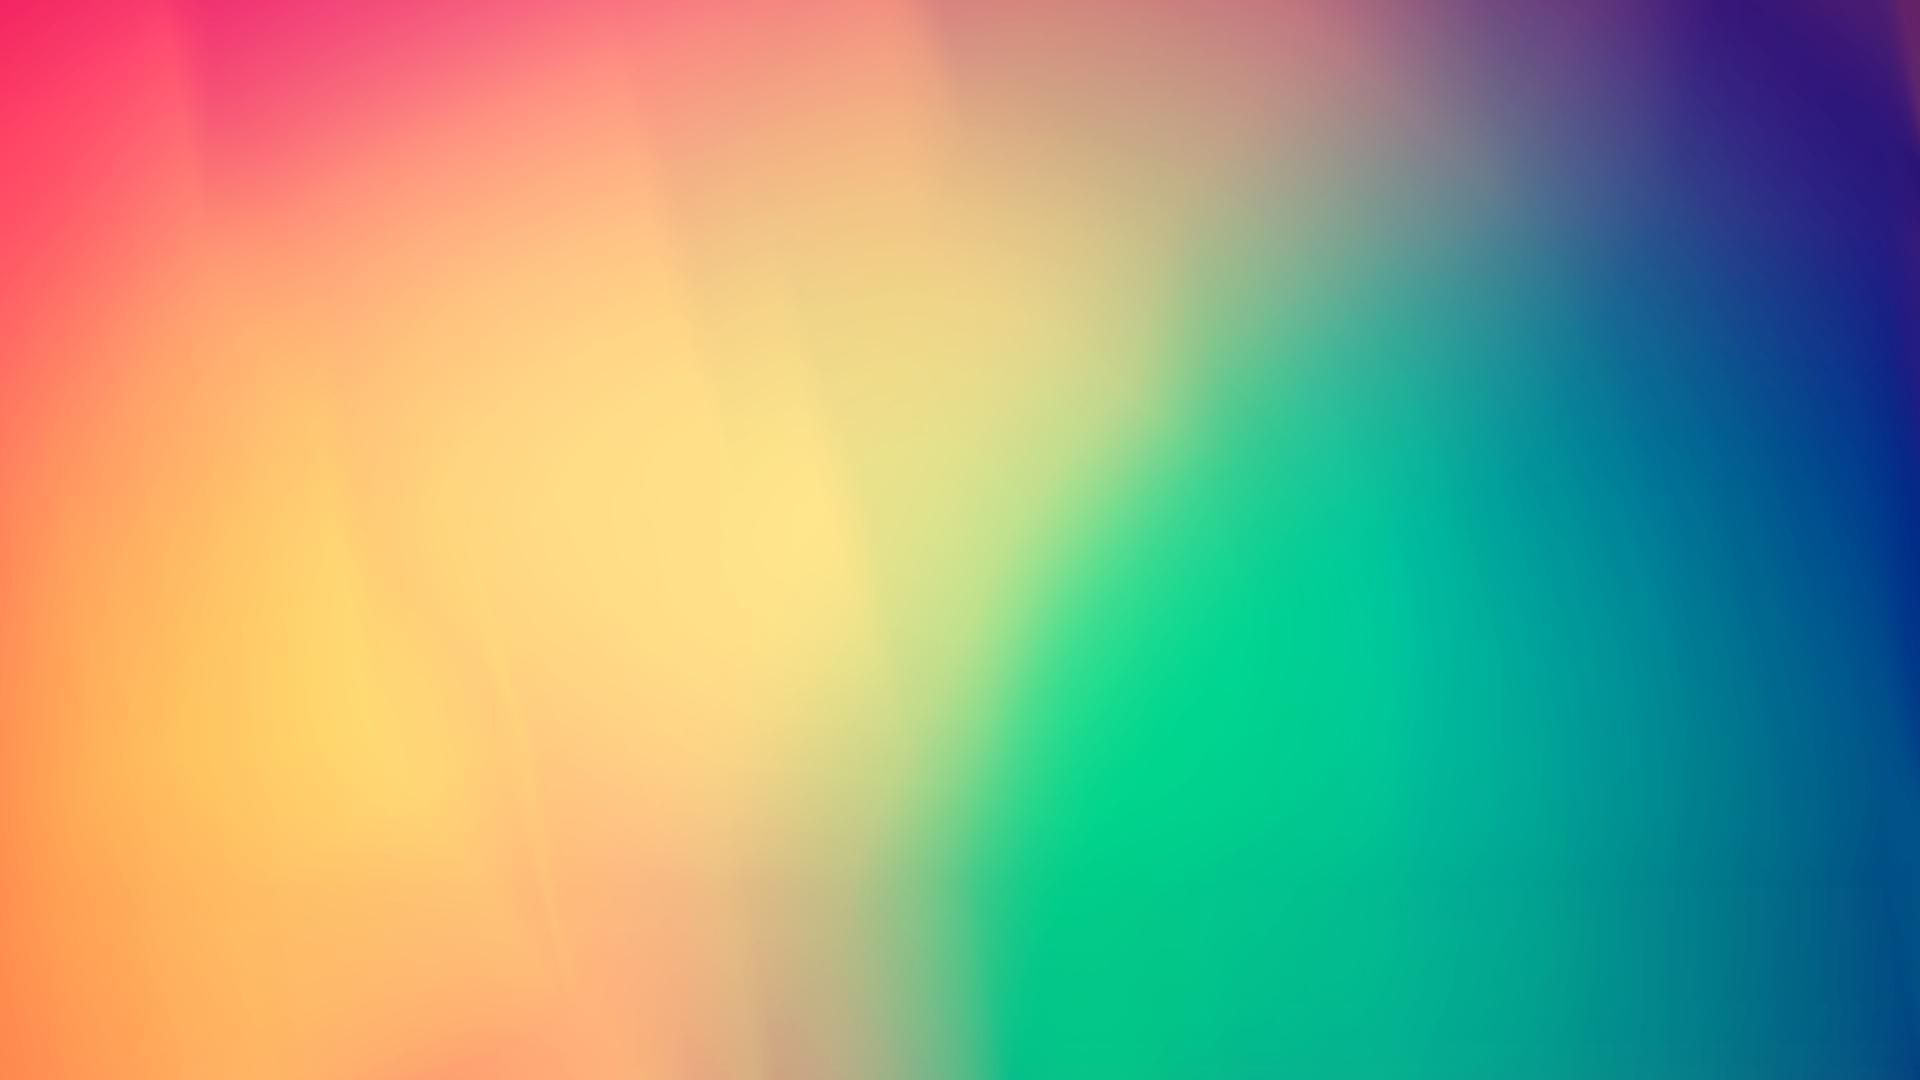 Colors - - High Quality and Resolution Wallpapers